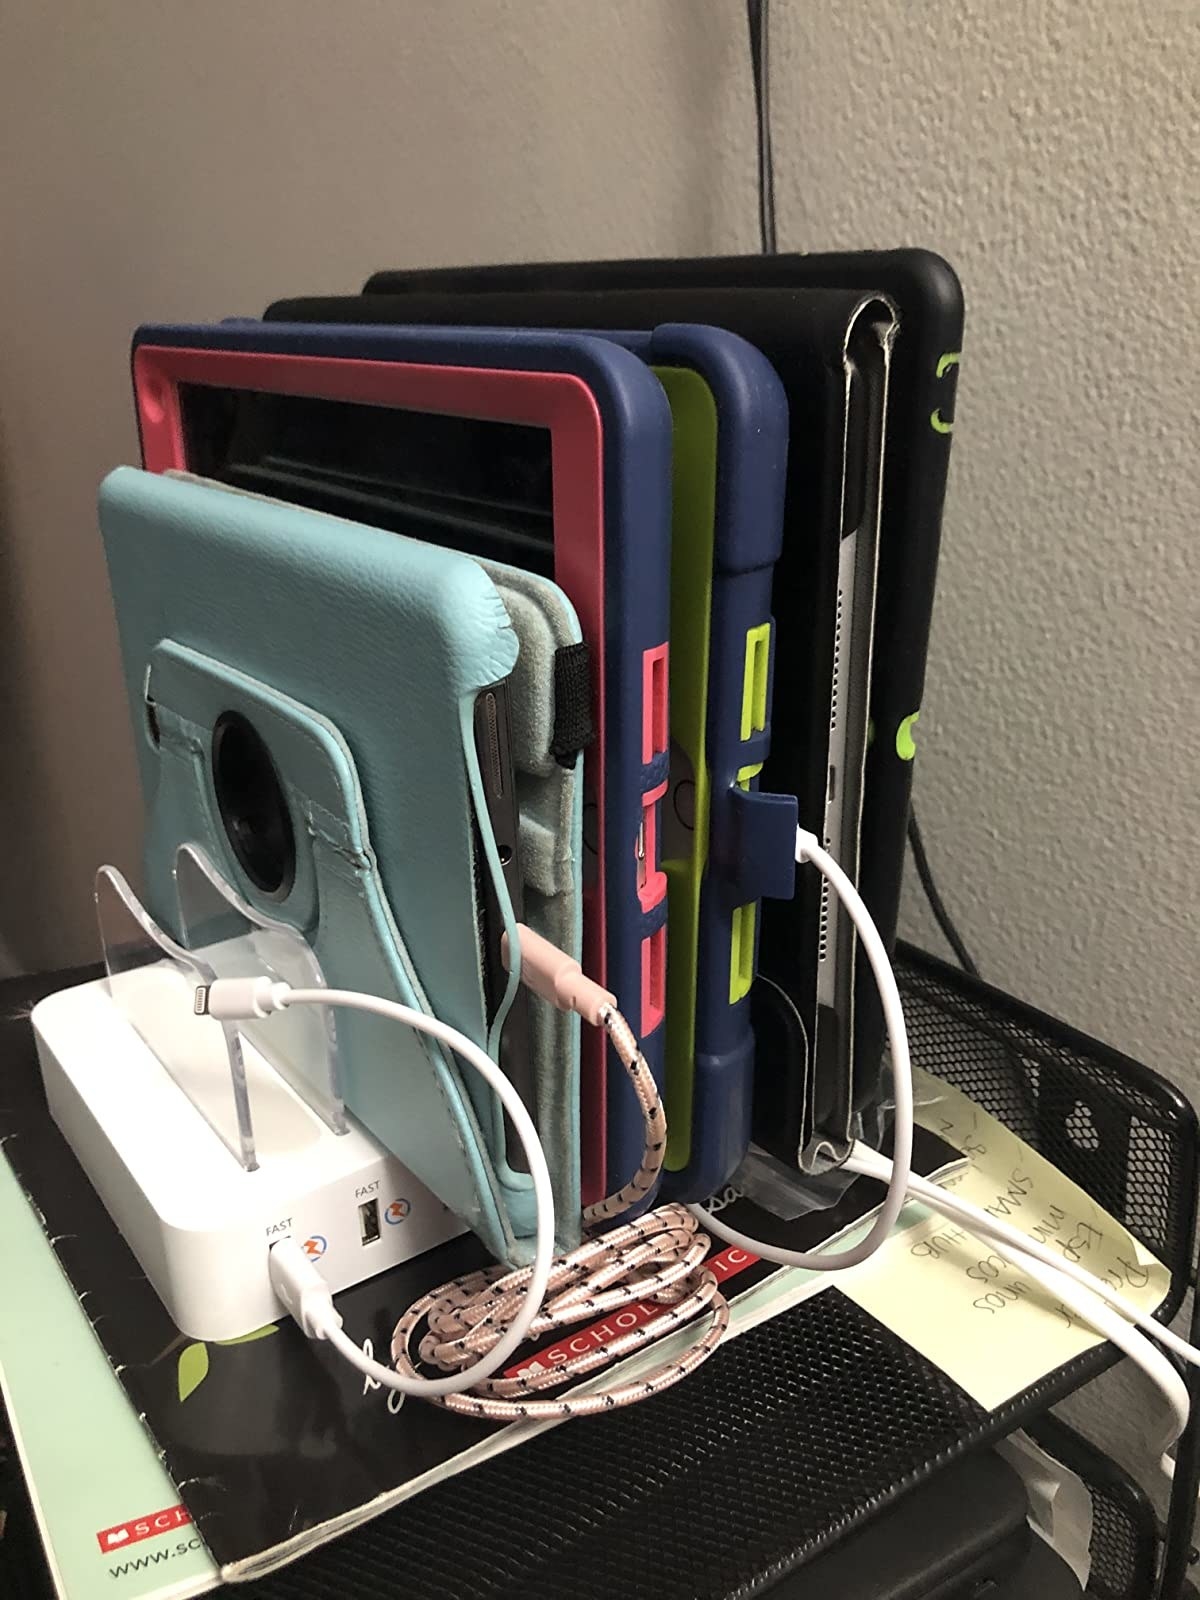 the charging dock filled with phones and tablets